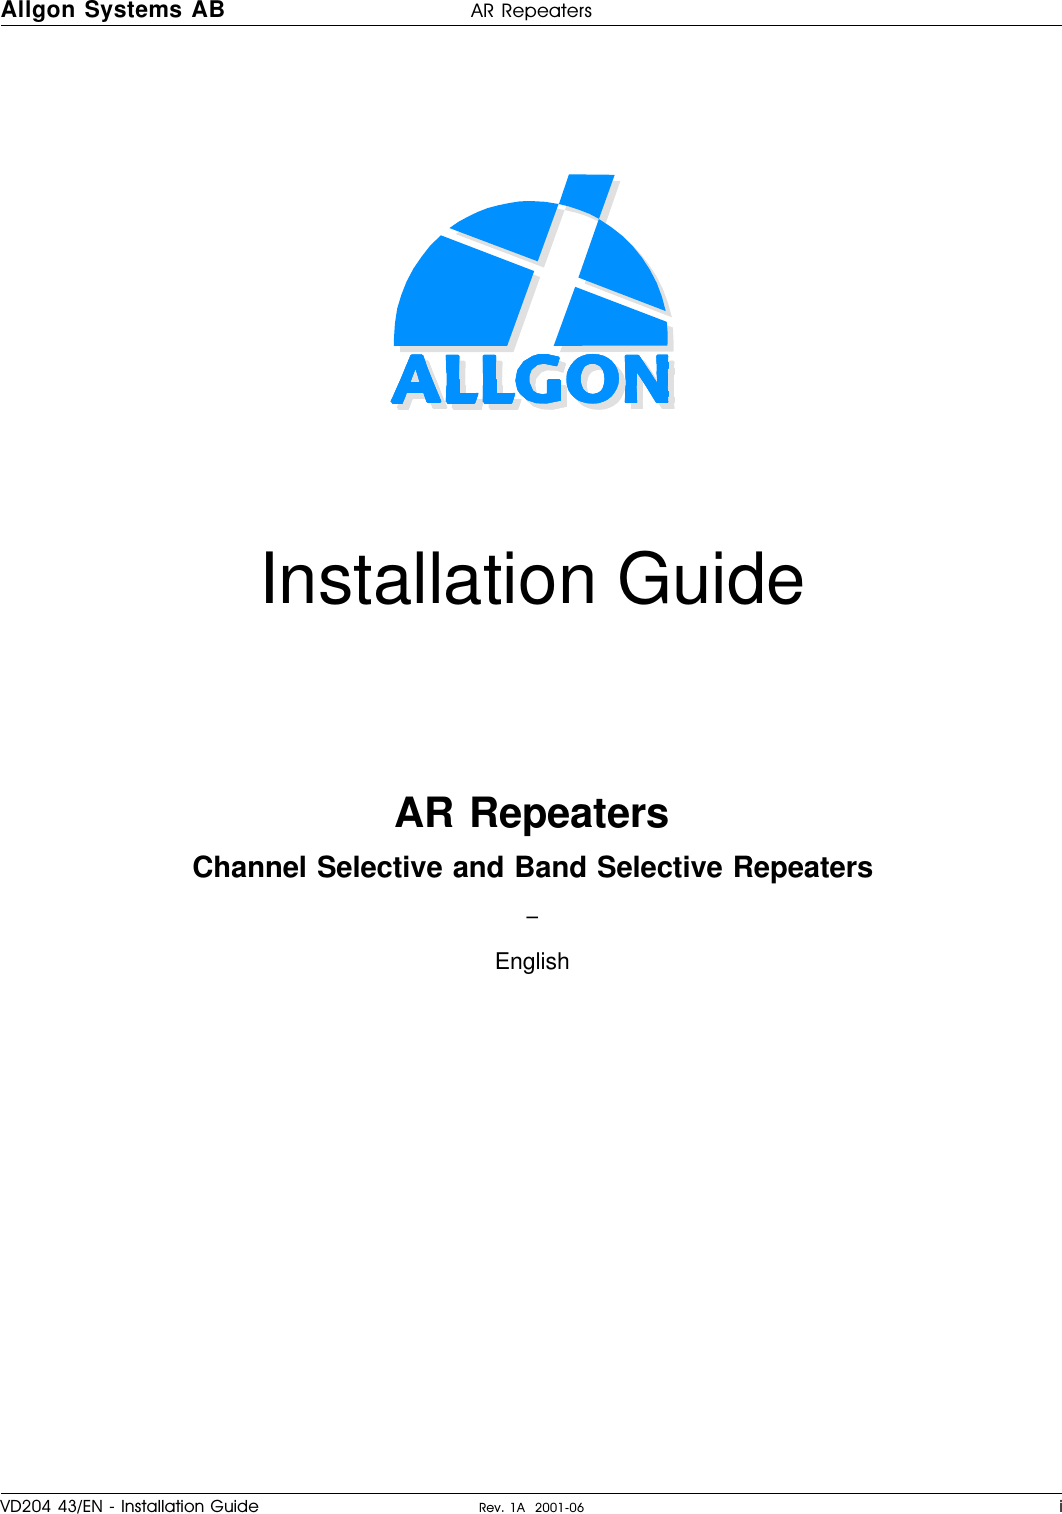 Installation GuideAR RepeatersChannel Selective and Band Selective Repeaters–EnglishAllgon Systems AB AR RepeatersVD204 43/EN - Installation Guide Rev. 1A  2001-06 i